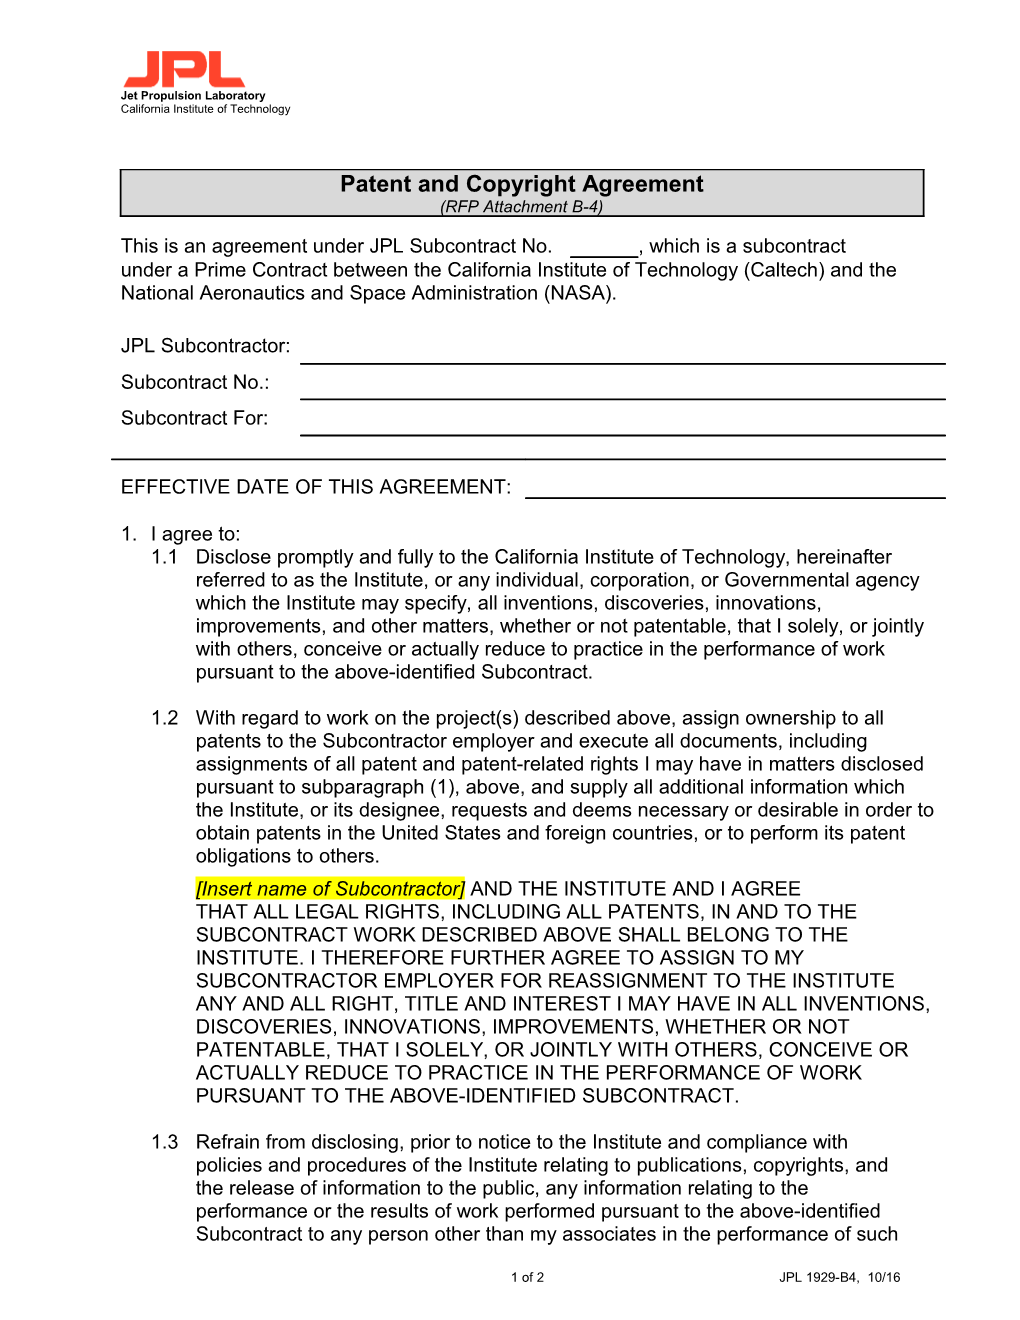 JPL 1929: Patent and Copyright Agreement